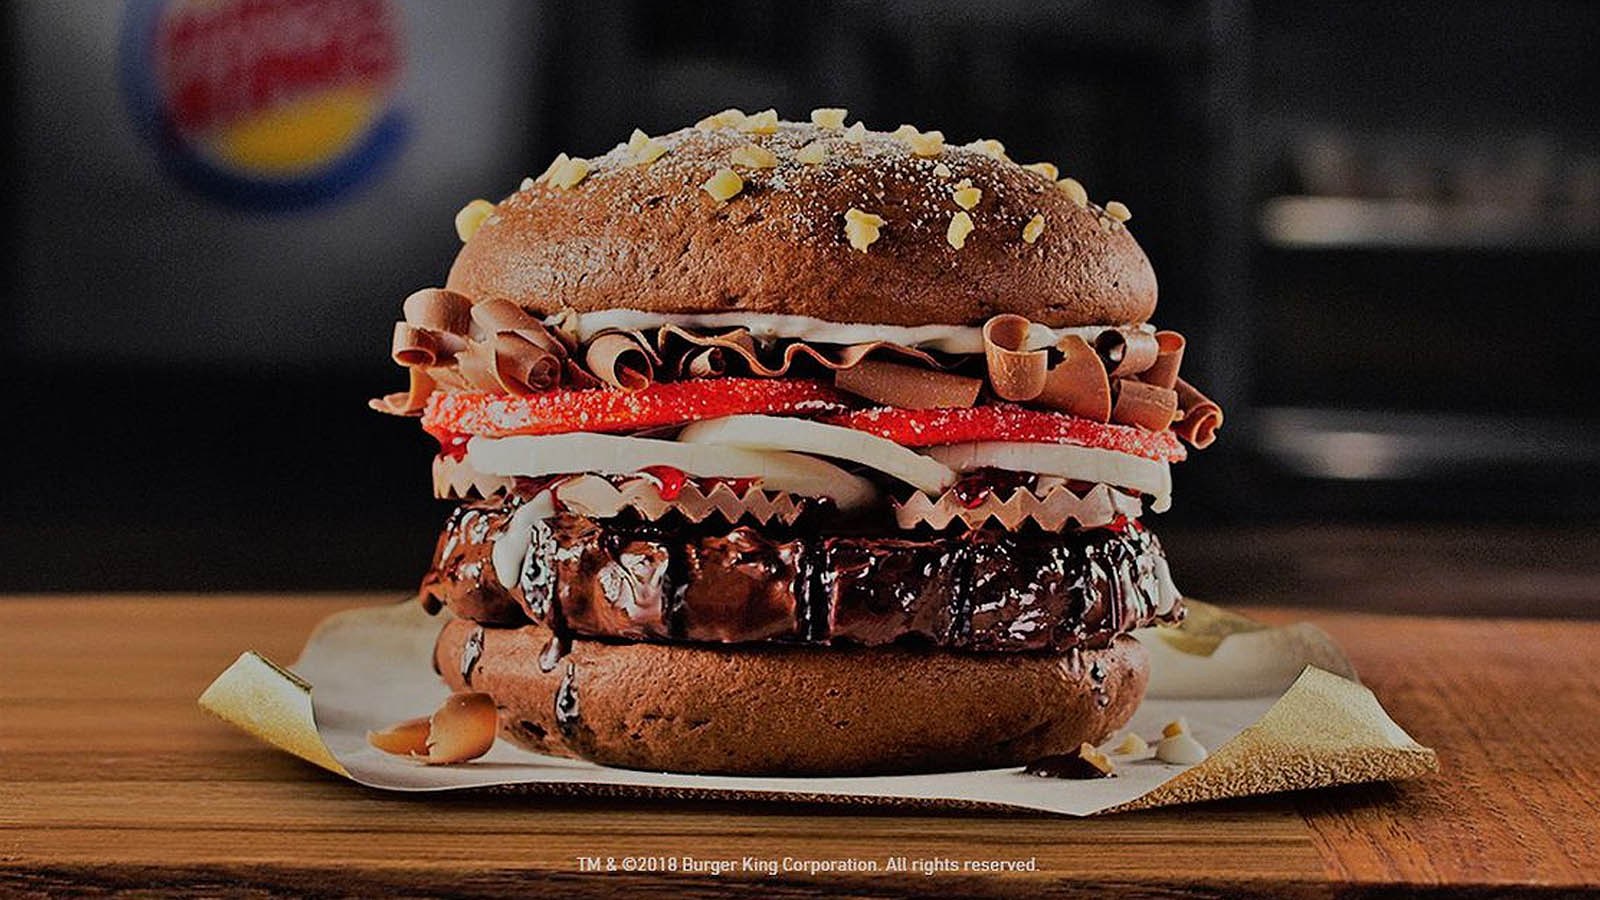 Burger King’s Chocolate Whopper